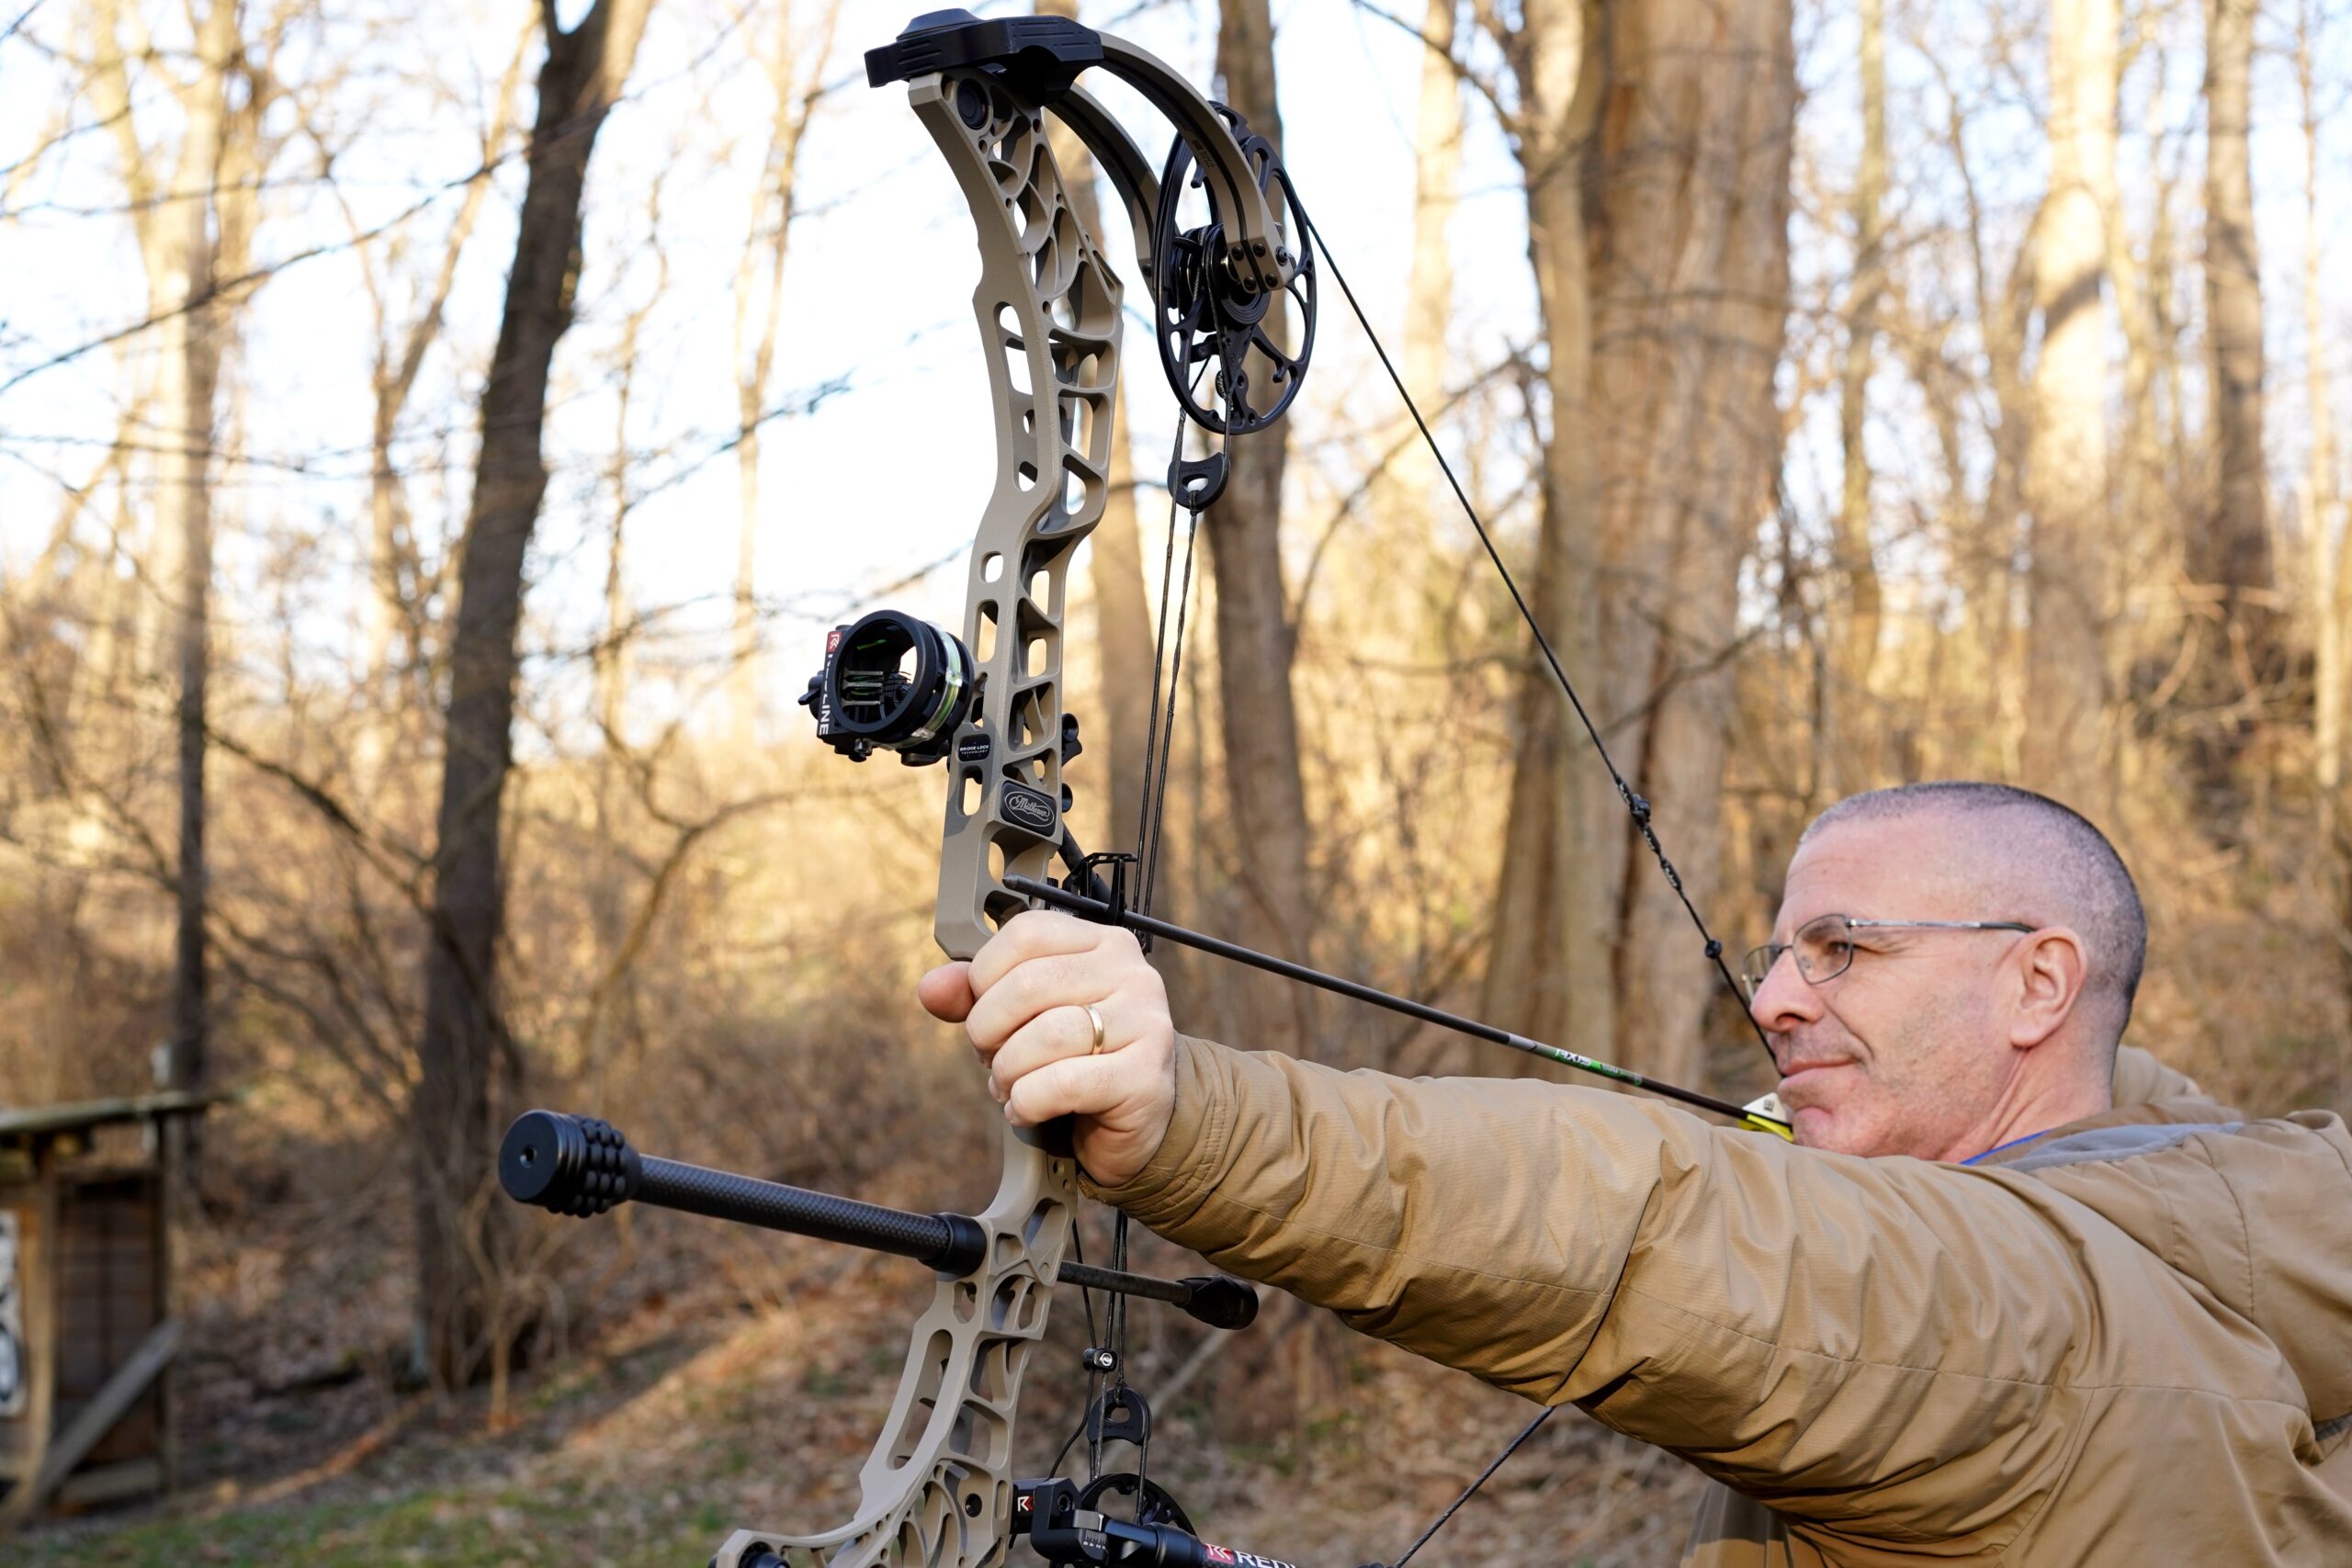 The author shoots the Mathews Phase 4 during the Outdoor Life Bow Test.